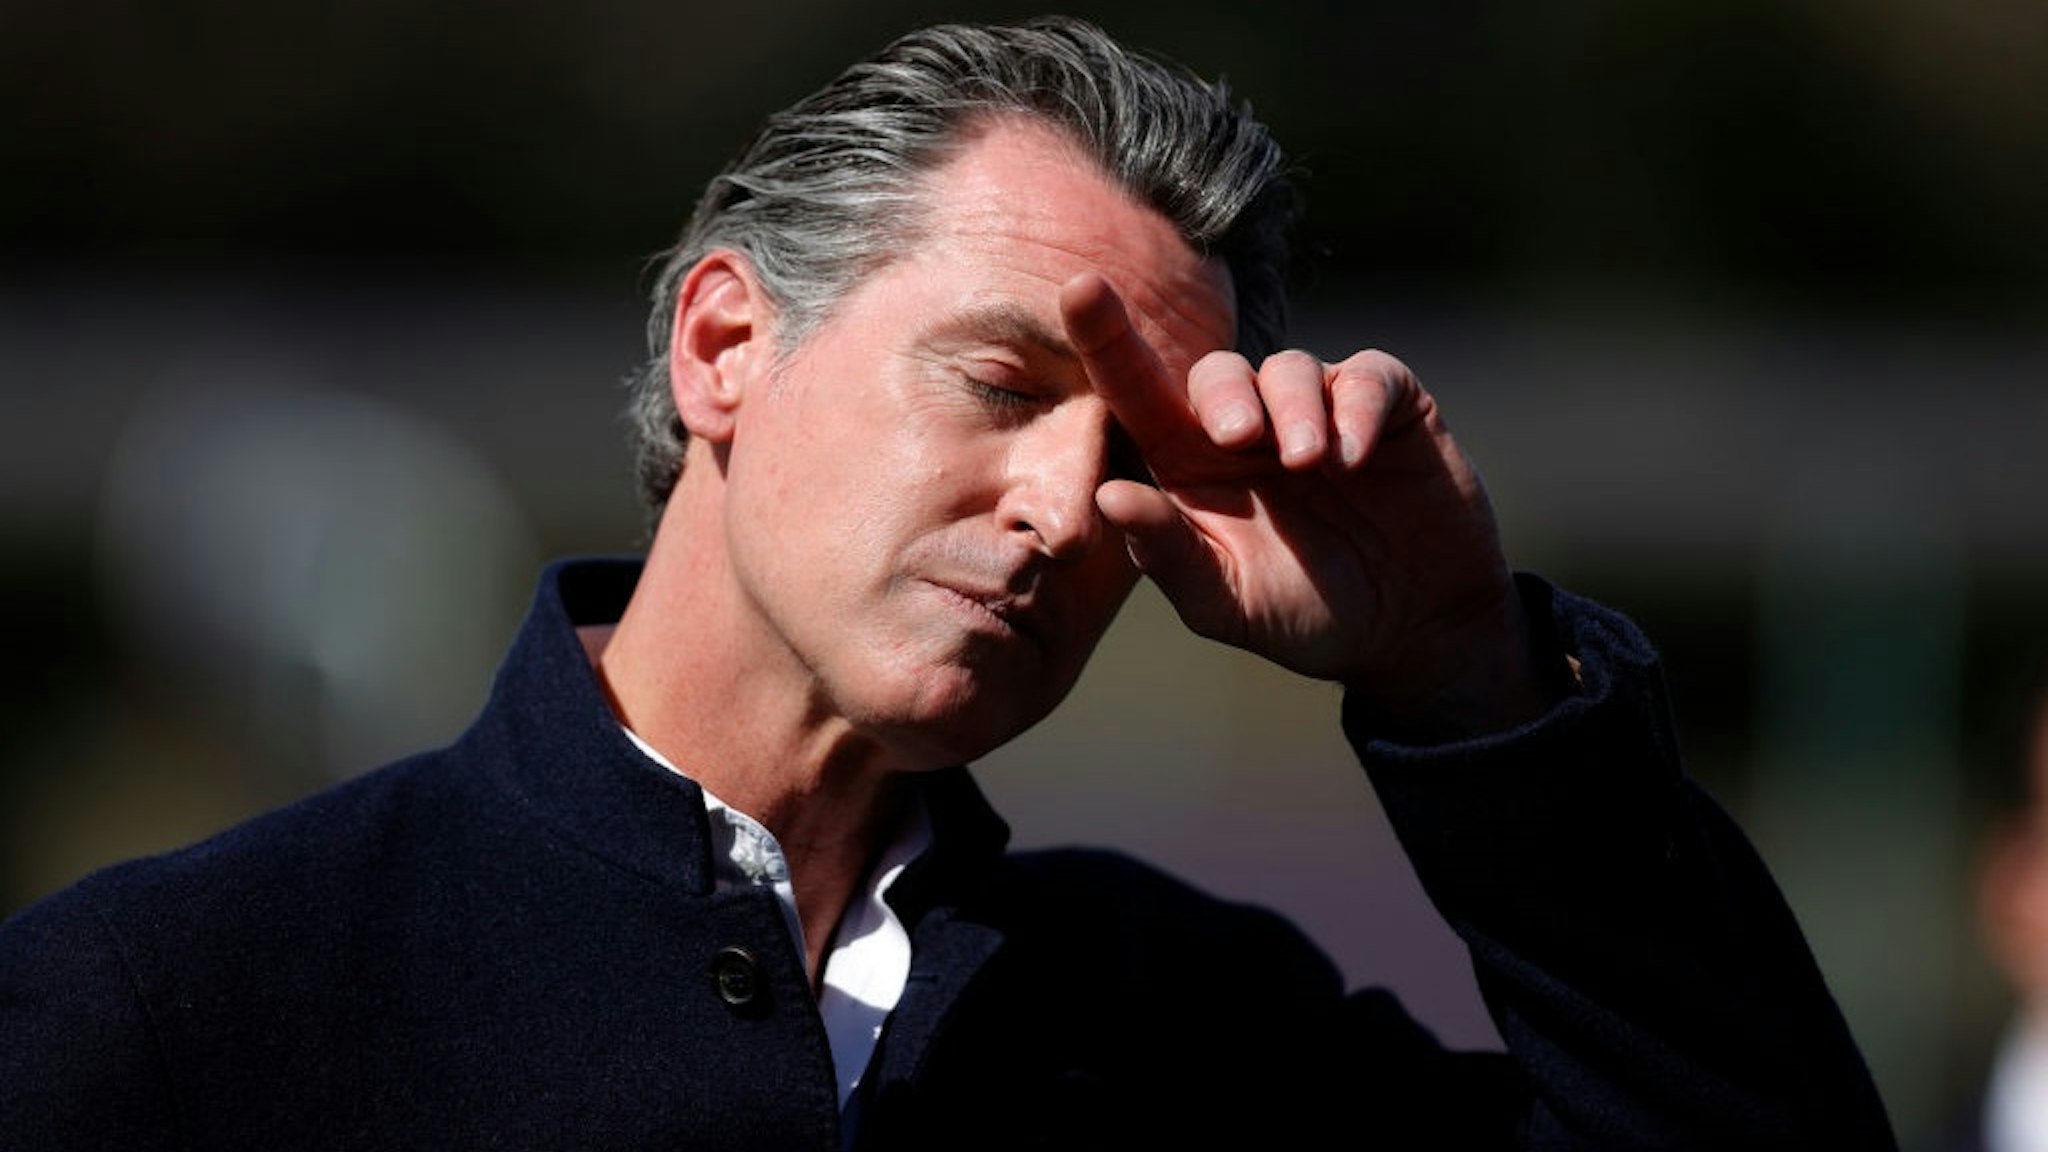 PALO ALTO, CALIFORNIA - MARCH 02: California Gov. Gavin Newsom pauses during a news conference after touring Barron Park Elementary School on March 02, 2021 in Palo Alto, California.